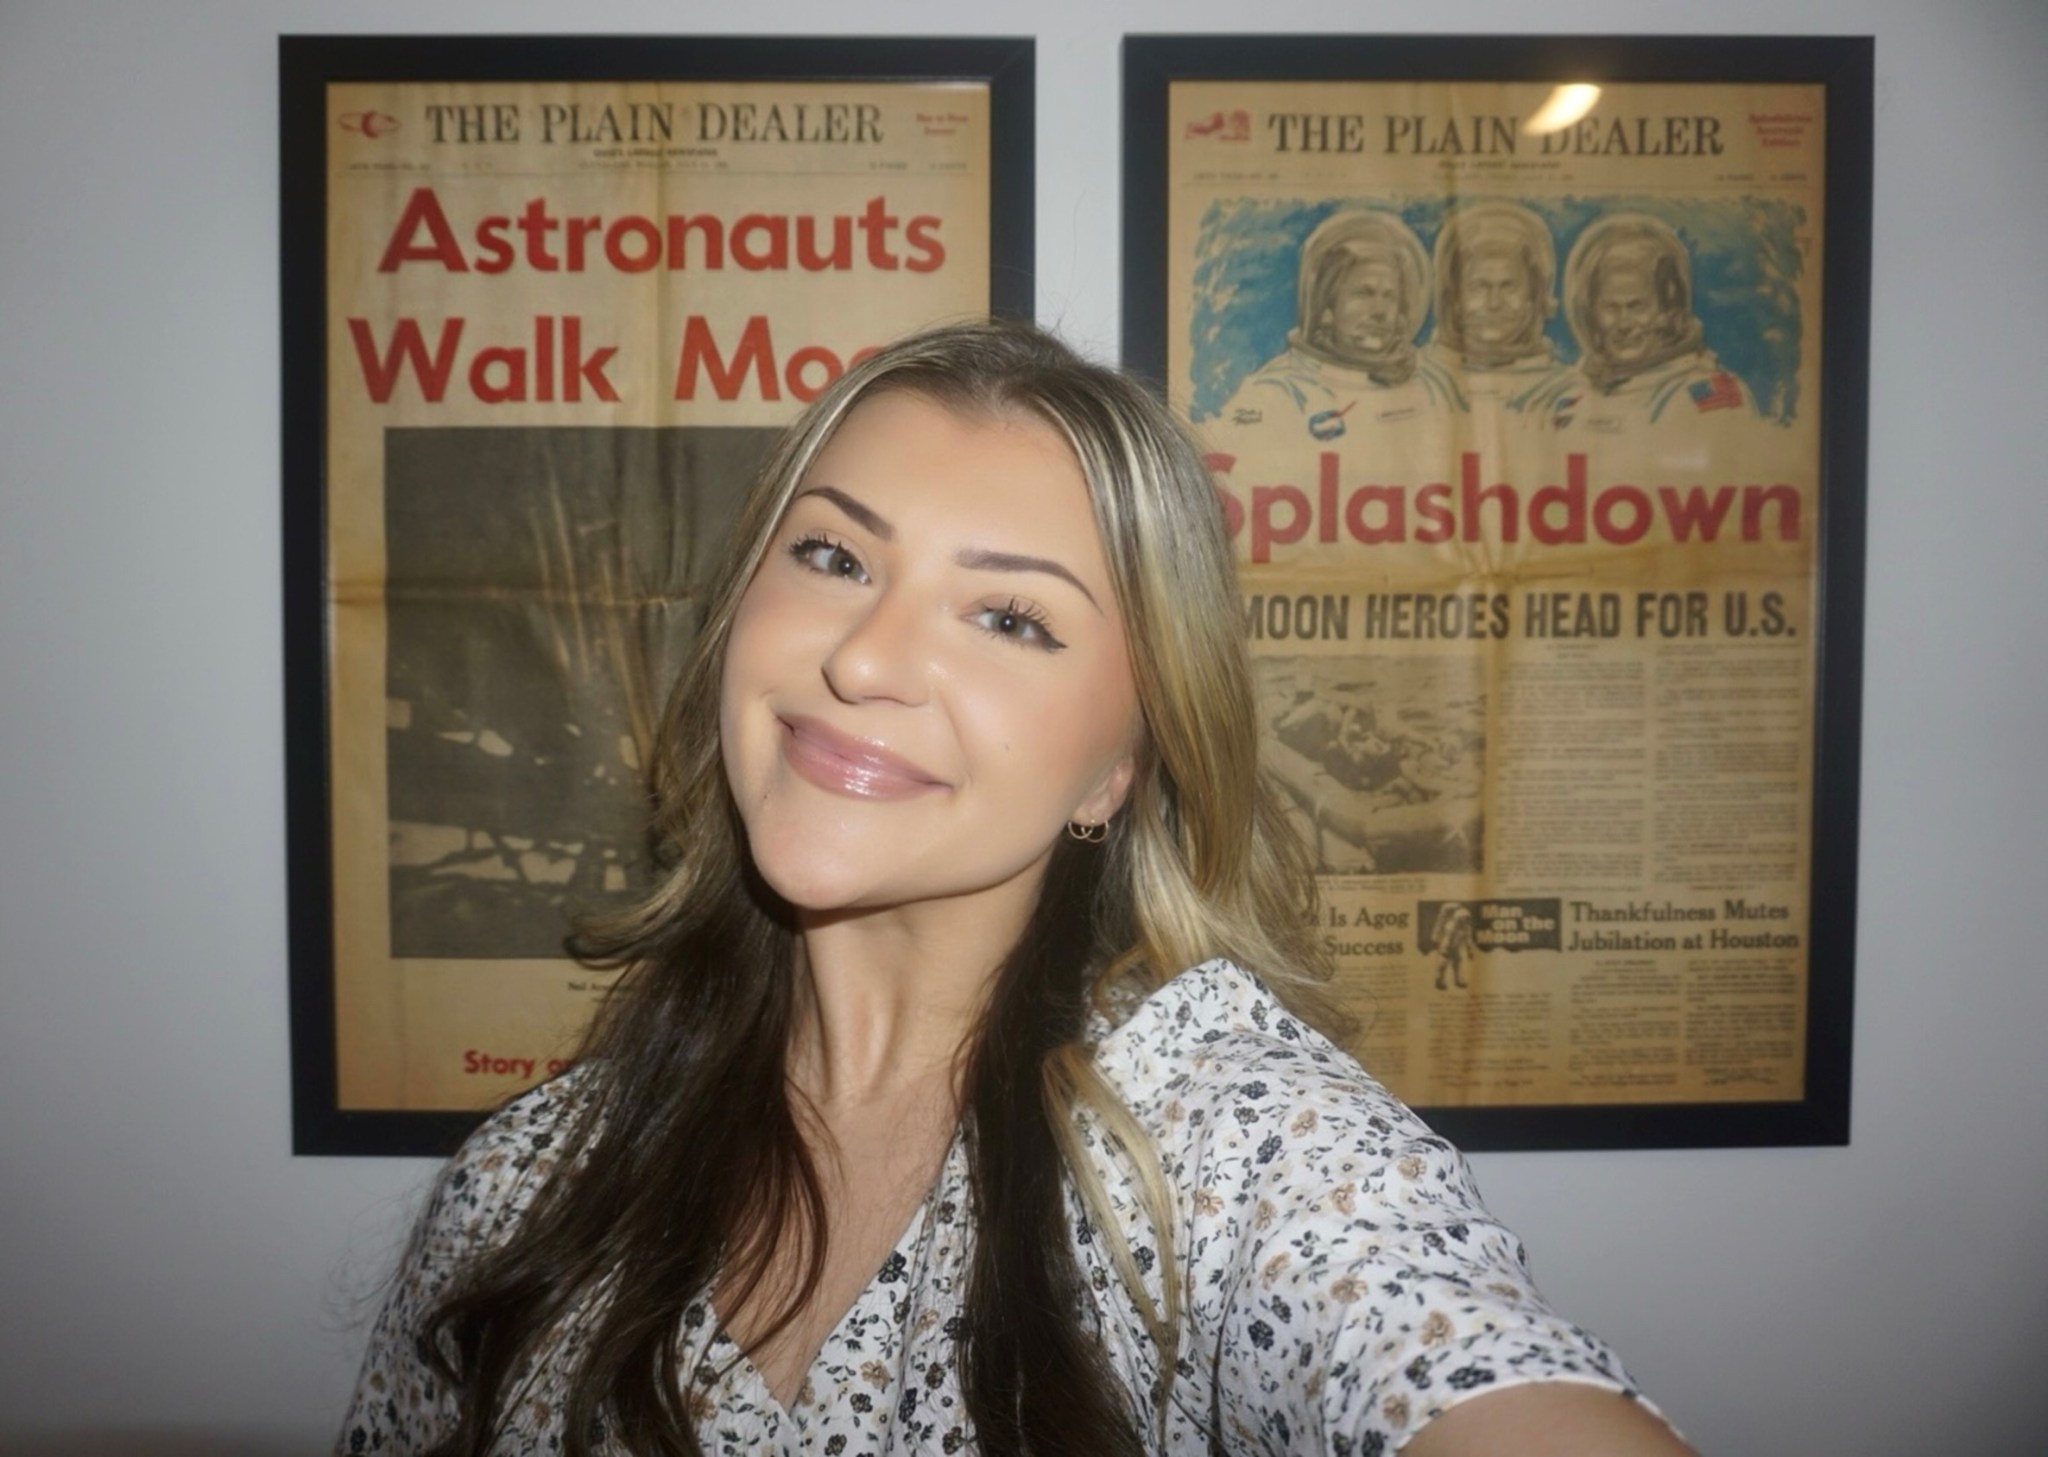 Cassi Meyer, wearing a white blouse with small flowers, poses in her selfie with two framed newspaper front pages hanging on the wall behind her.